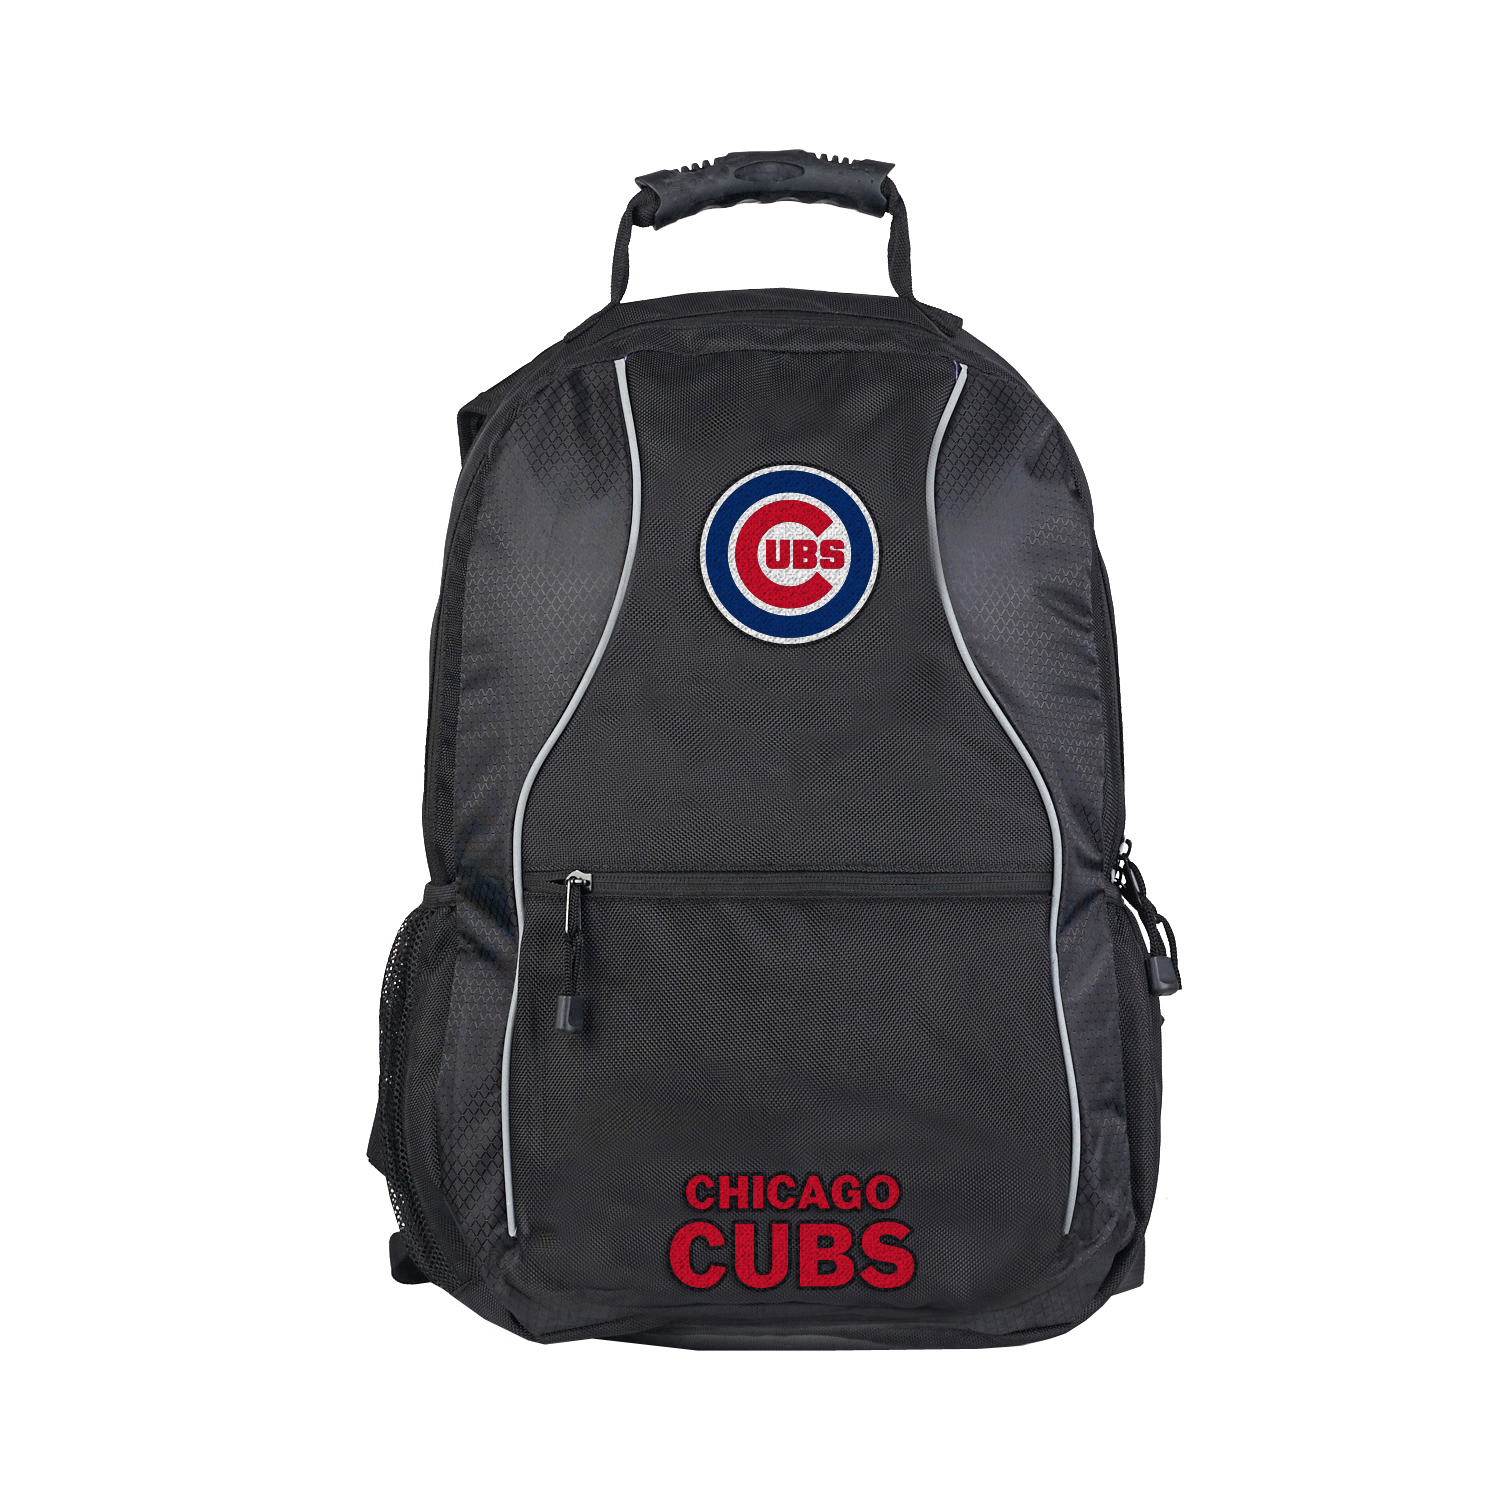 MLB Chicago Cubs “Phenom” 19”H x 8”L x 13”W Backpack - image 1 of 4